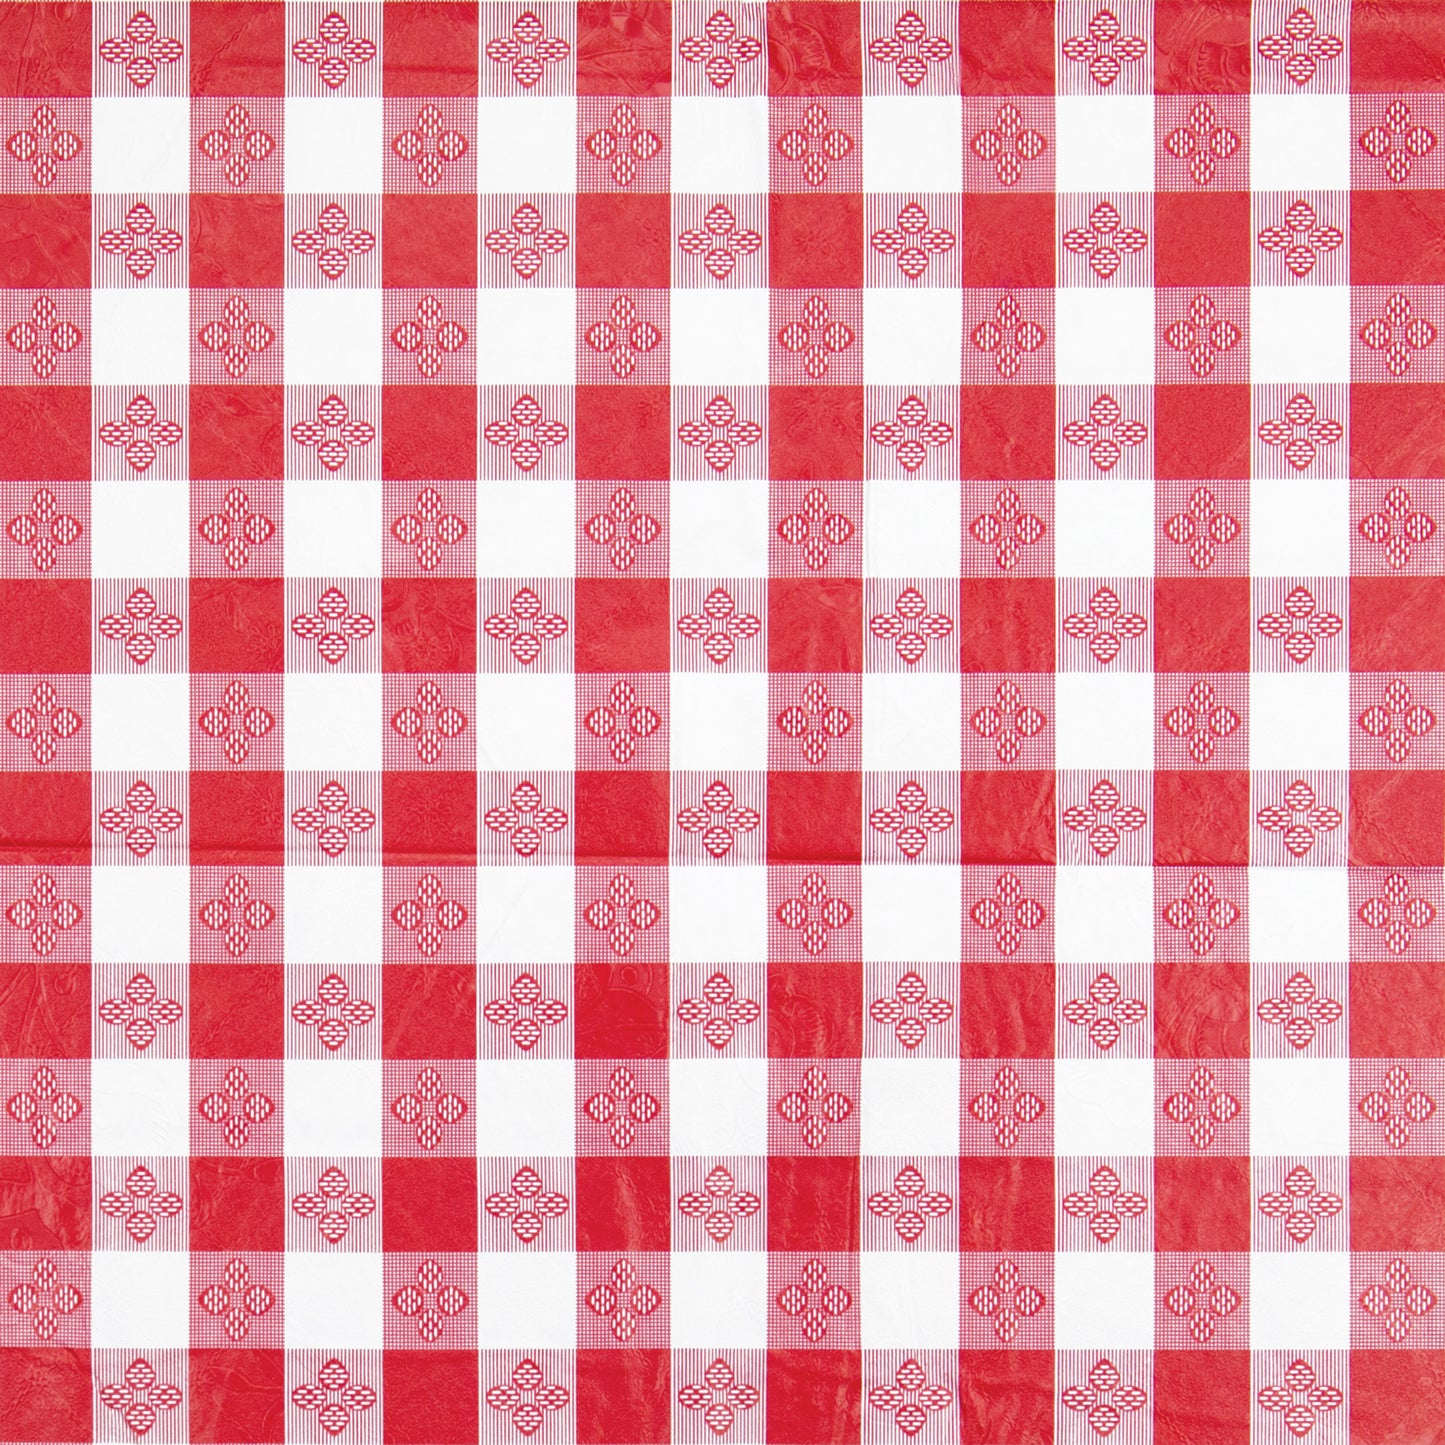 TBCO-70R - Table Cloth, Rectangle - Red, 52" x 70"